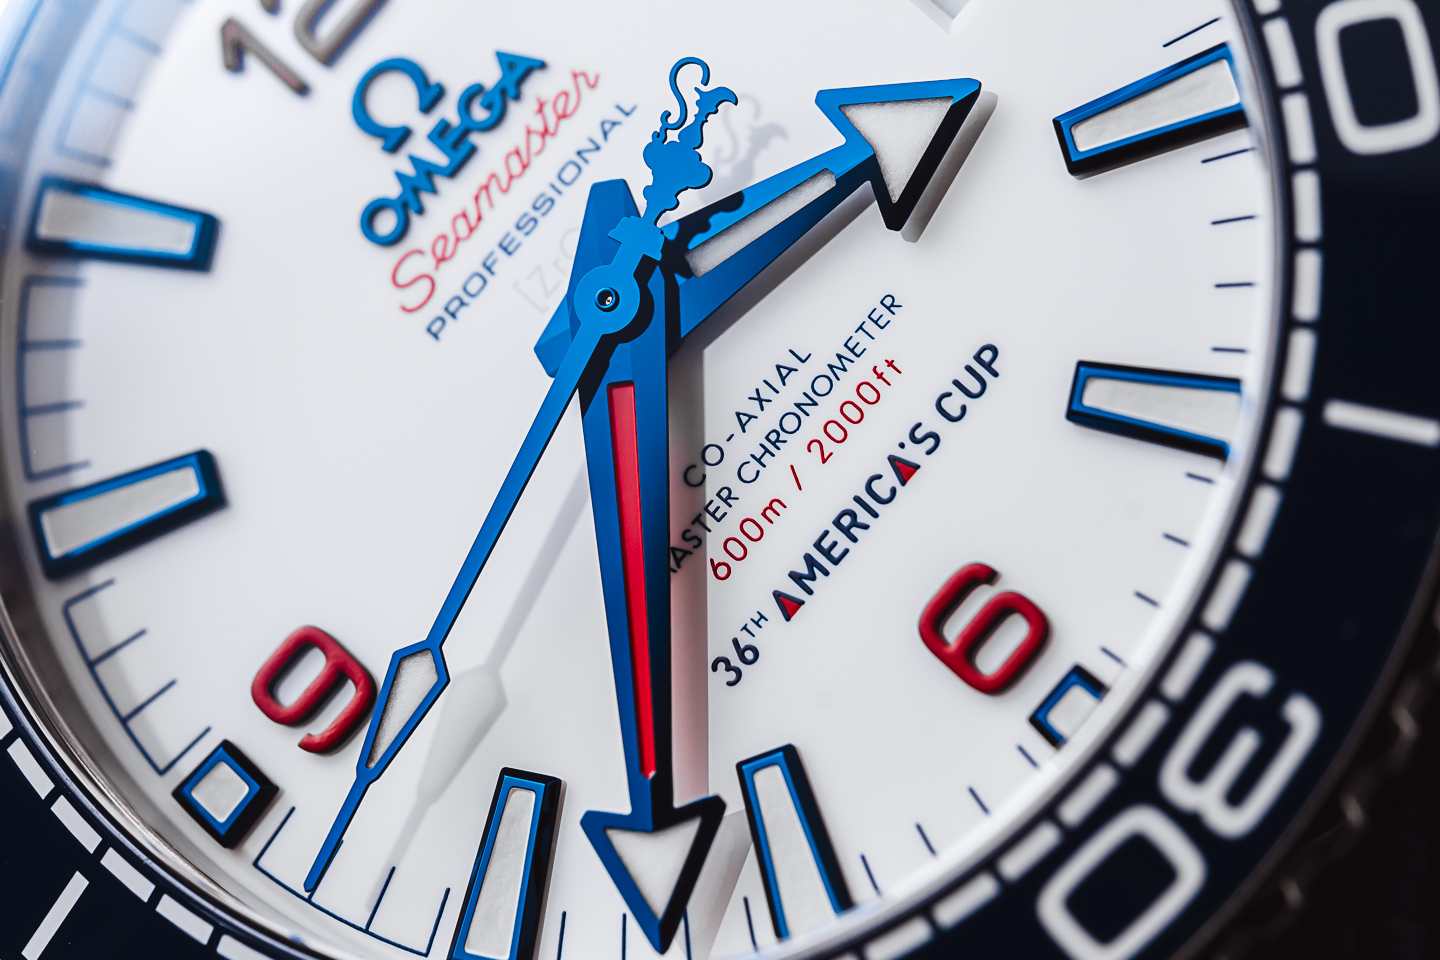 Omega's America's Cup Chronograph is a watch built for the high seas